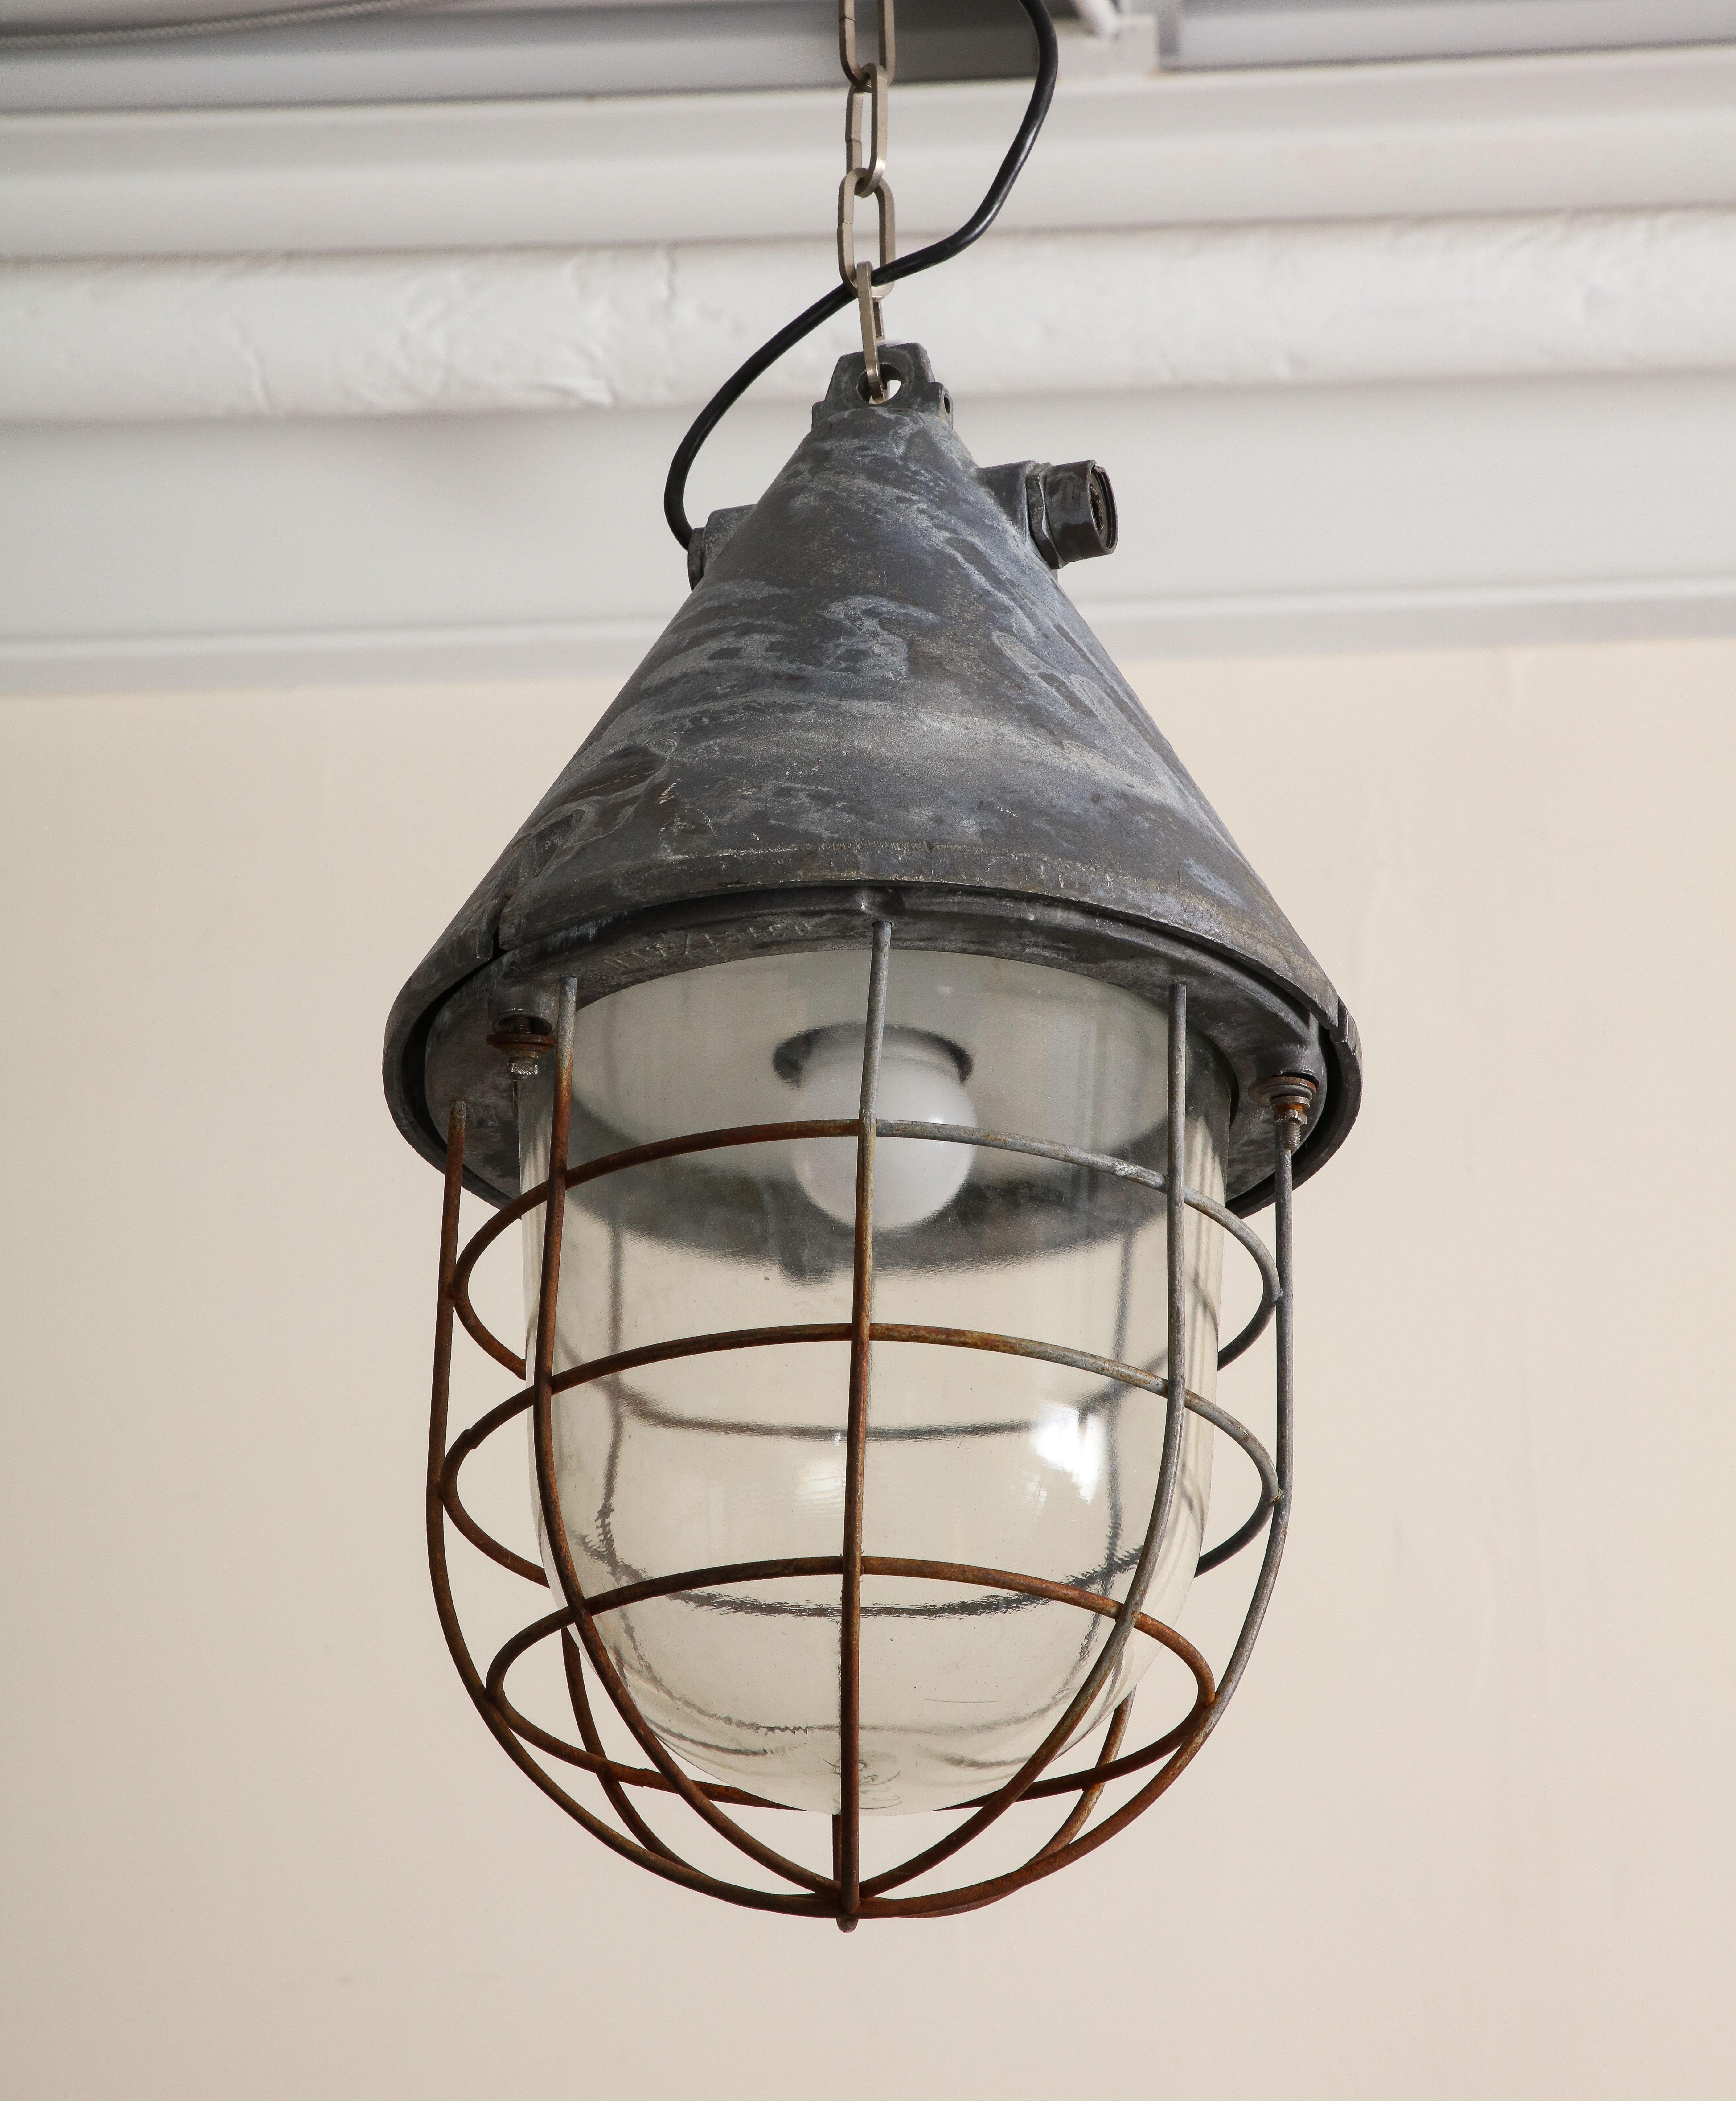 Pair of Vintage Industrial Cast Iron Cage Pendant Lights, C. 1920 For Sale 2